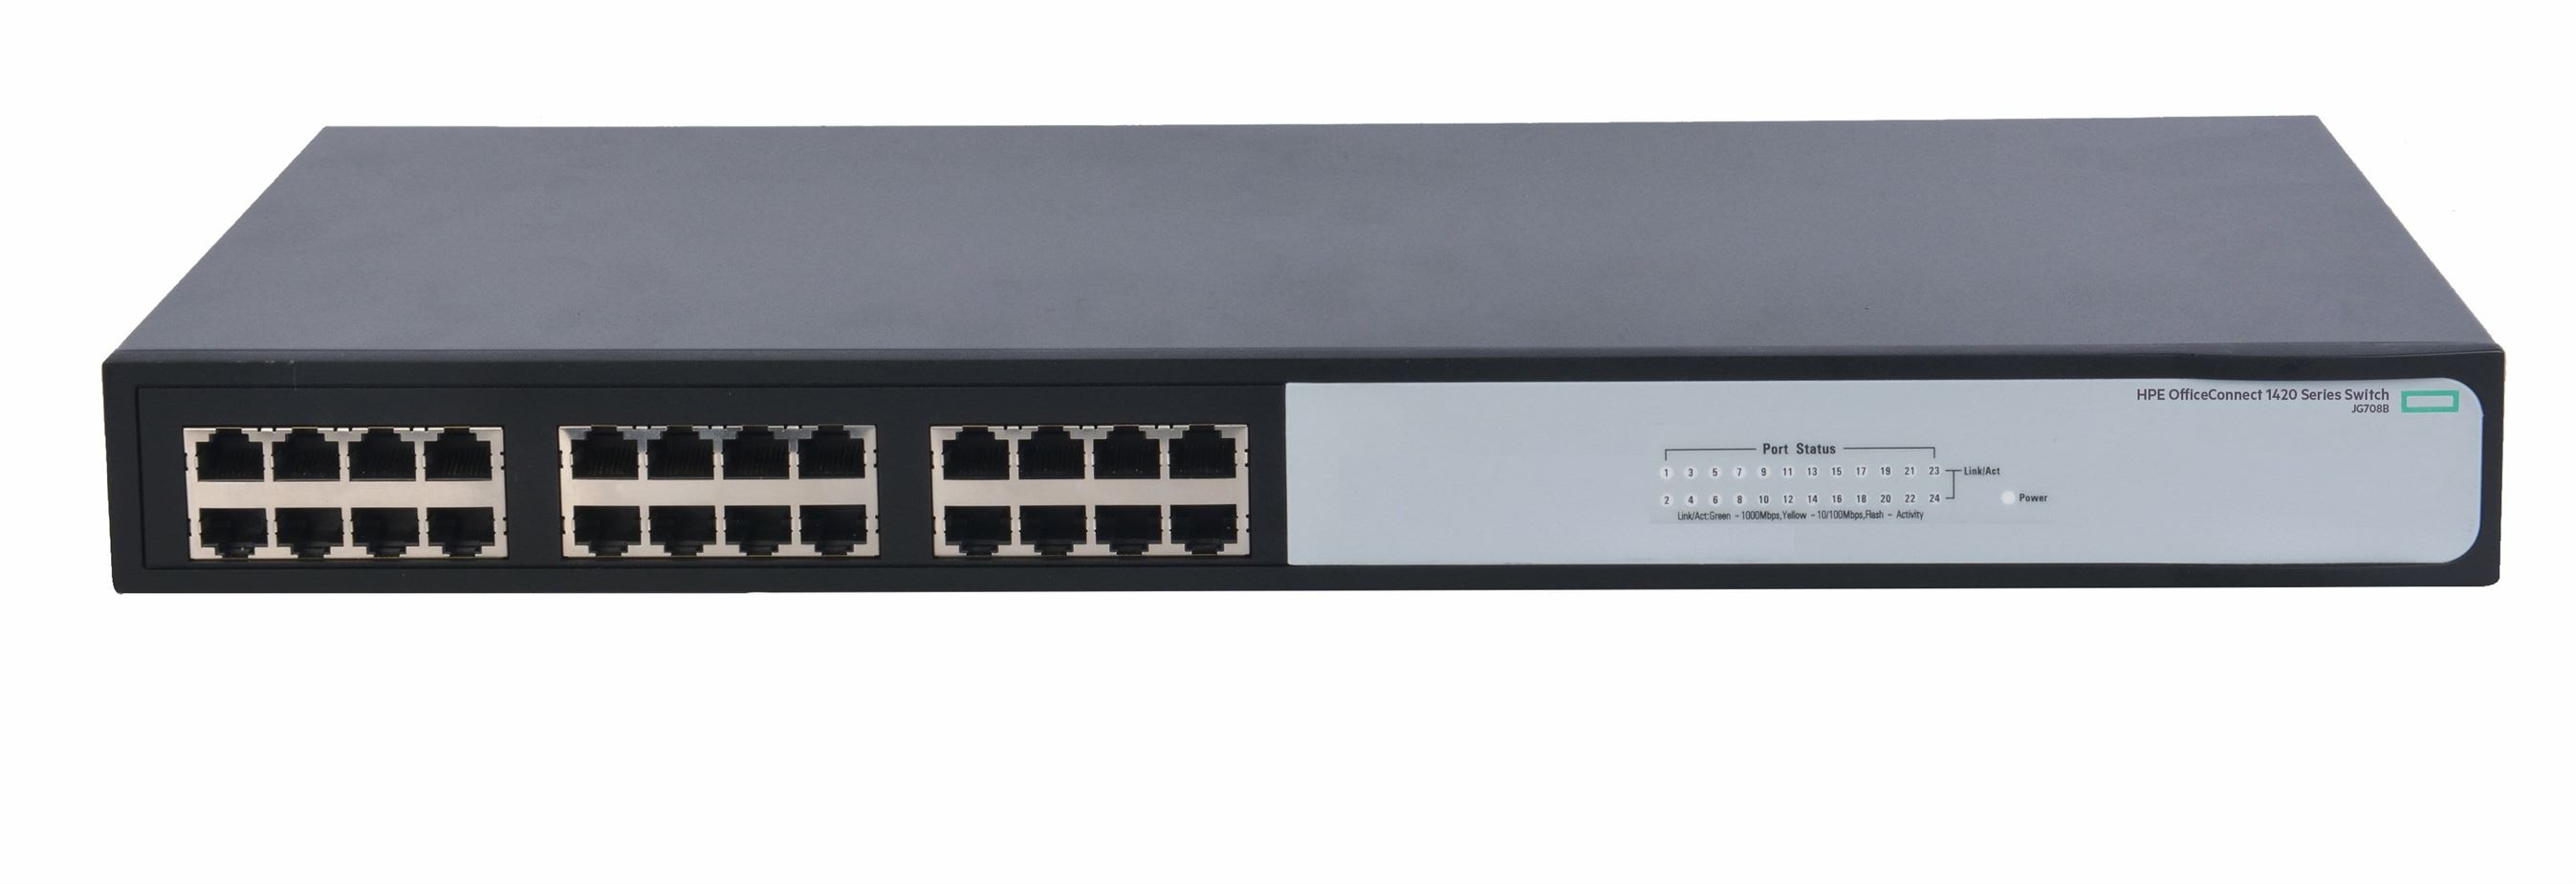 HPE OfficeConnect 1420 24G - switch - 24 ports - unmanaged - desktop, rack-mountable